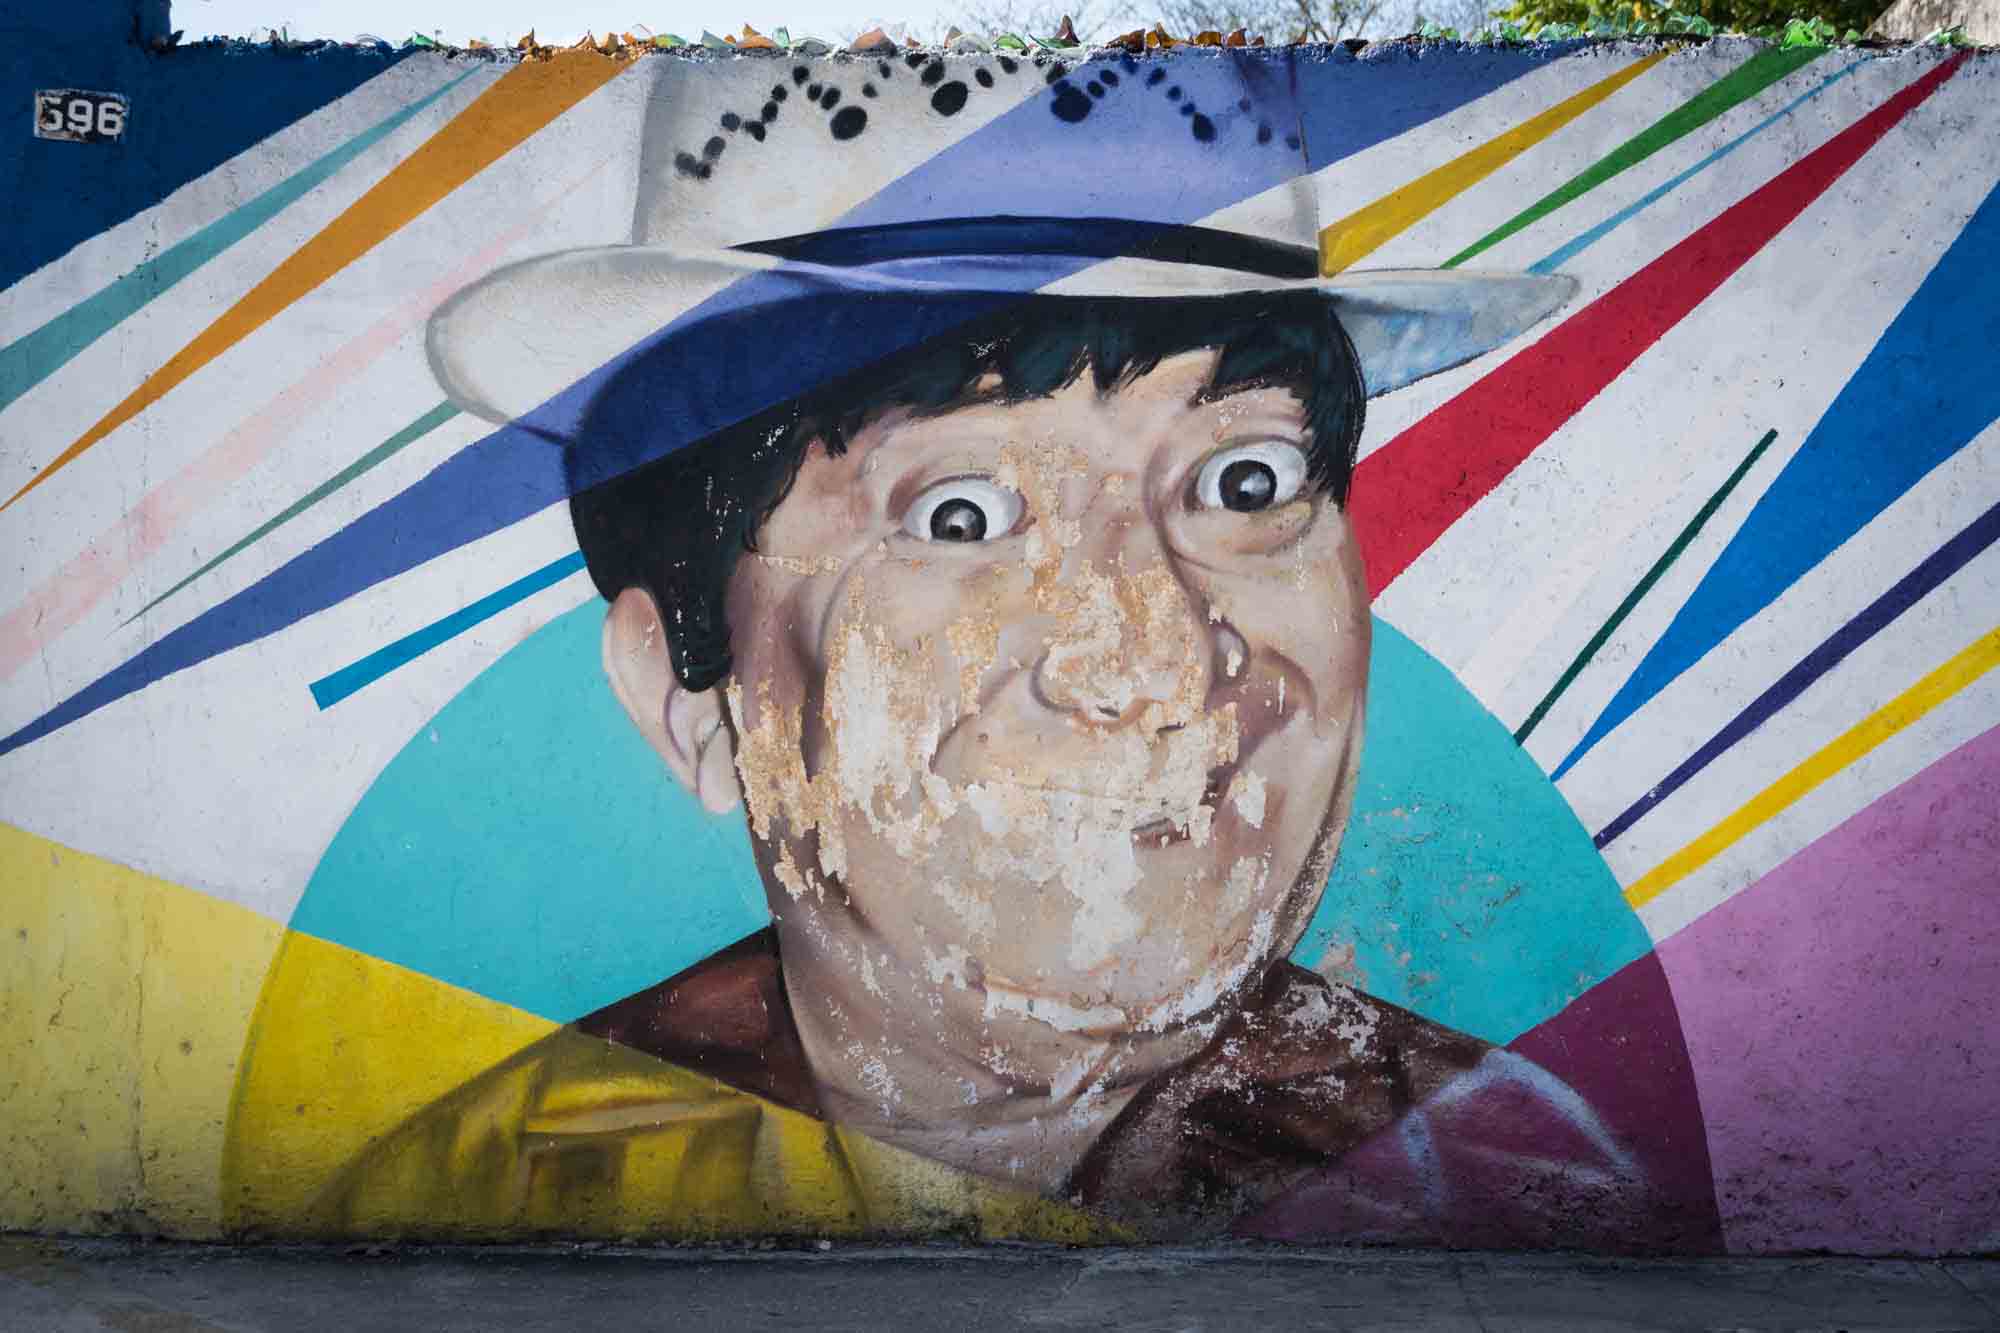 A colorful wall mural of a man wearing a hat on the streets of Merida